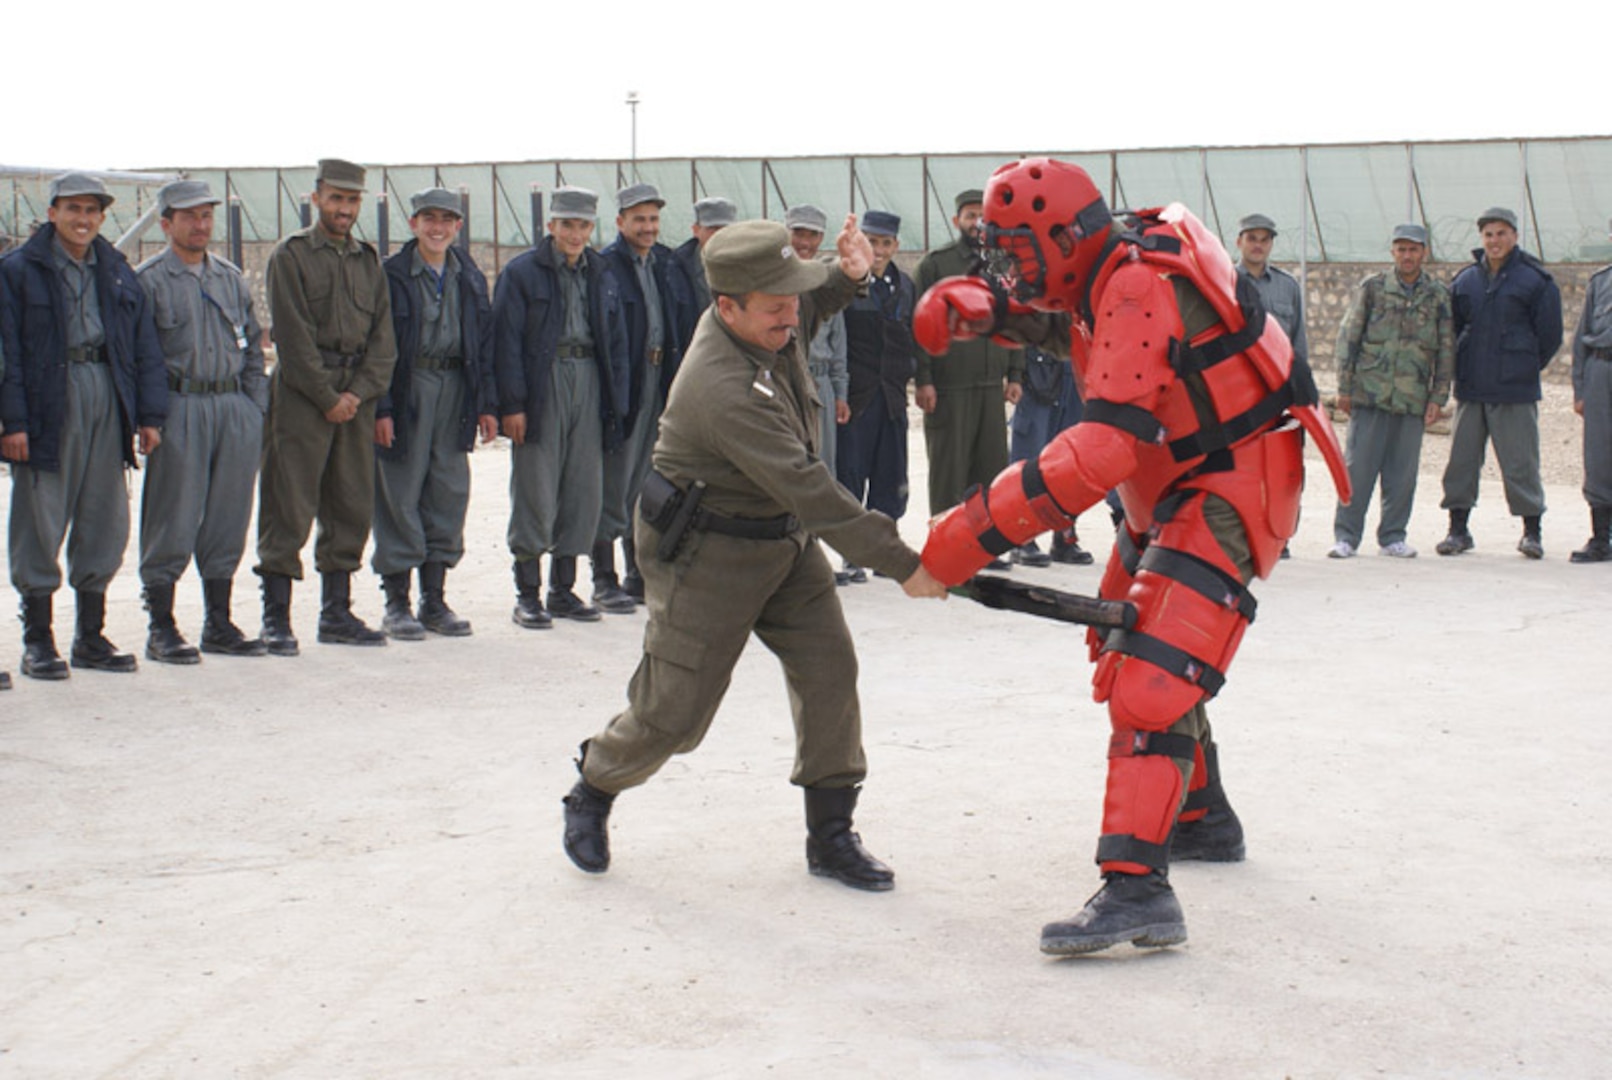 Two senior Afghan policemen demonstrate the proper use of a baton to subdue suspects. New recruits as well as policemen in the Transitional Integration Course receive instruction on the proper use of force and human rights during their training at the regional training center.